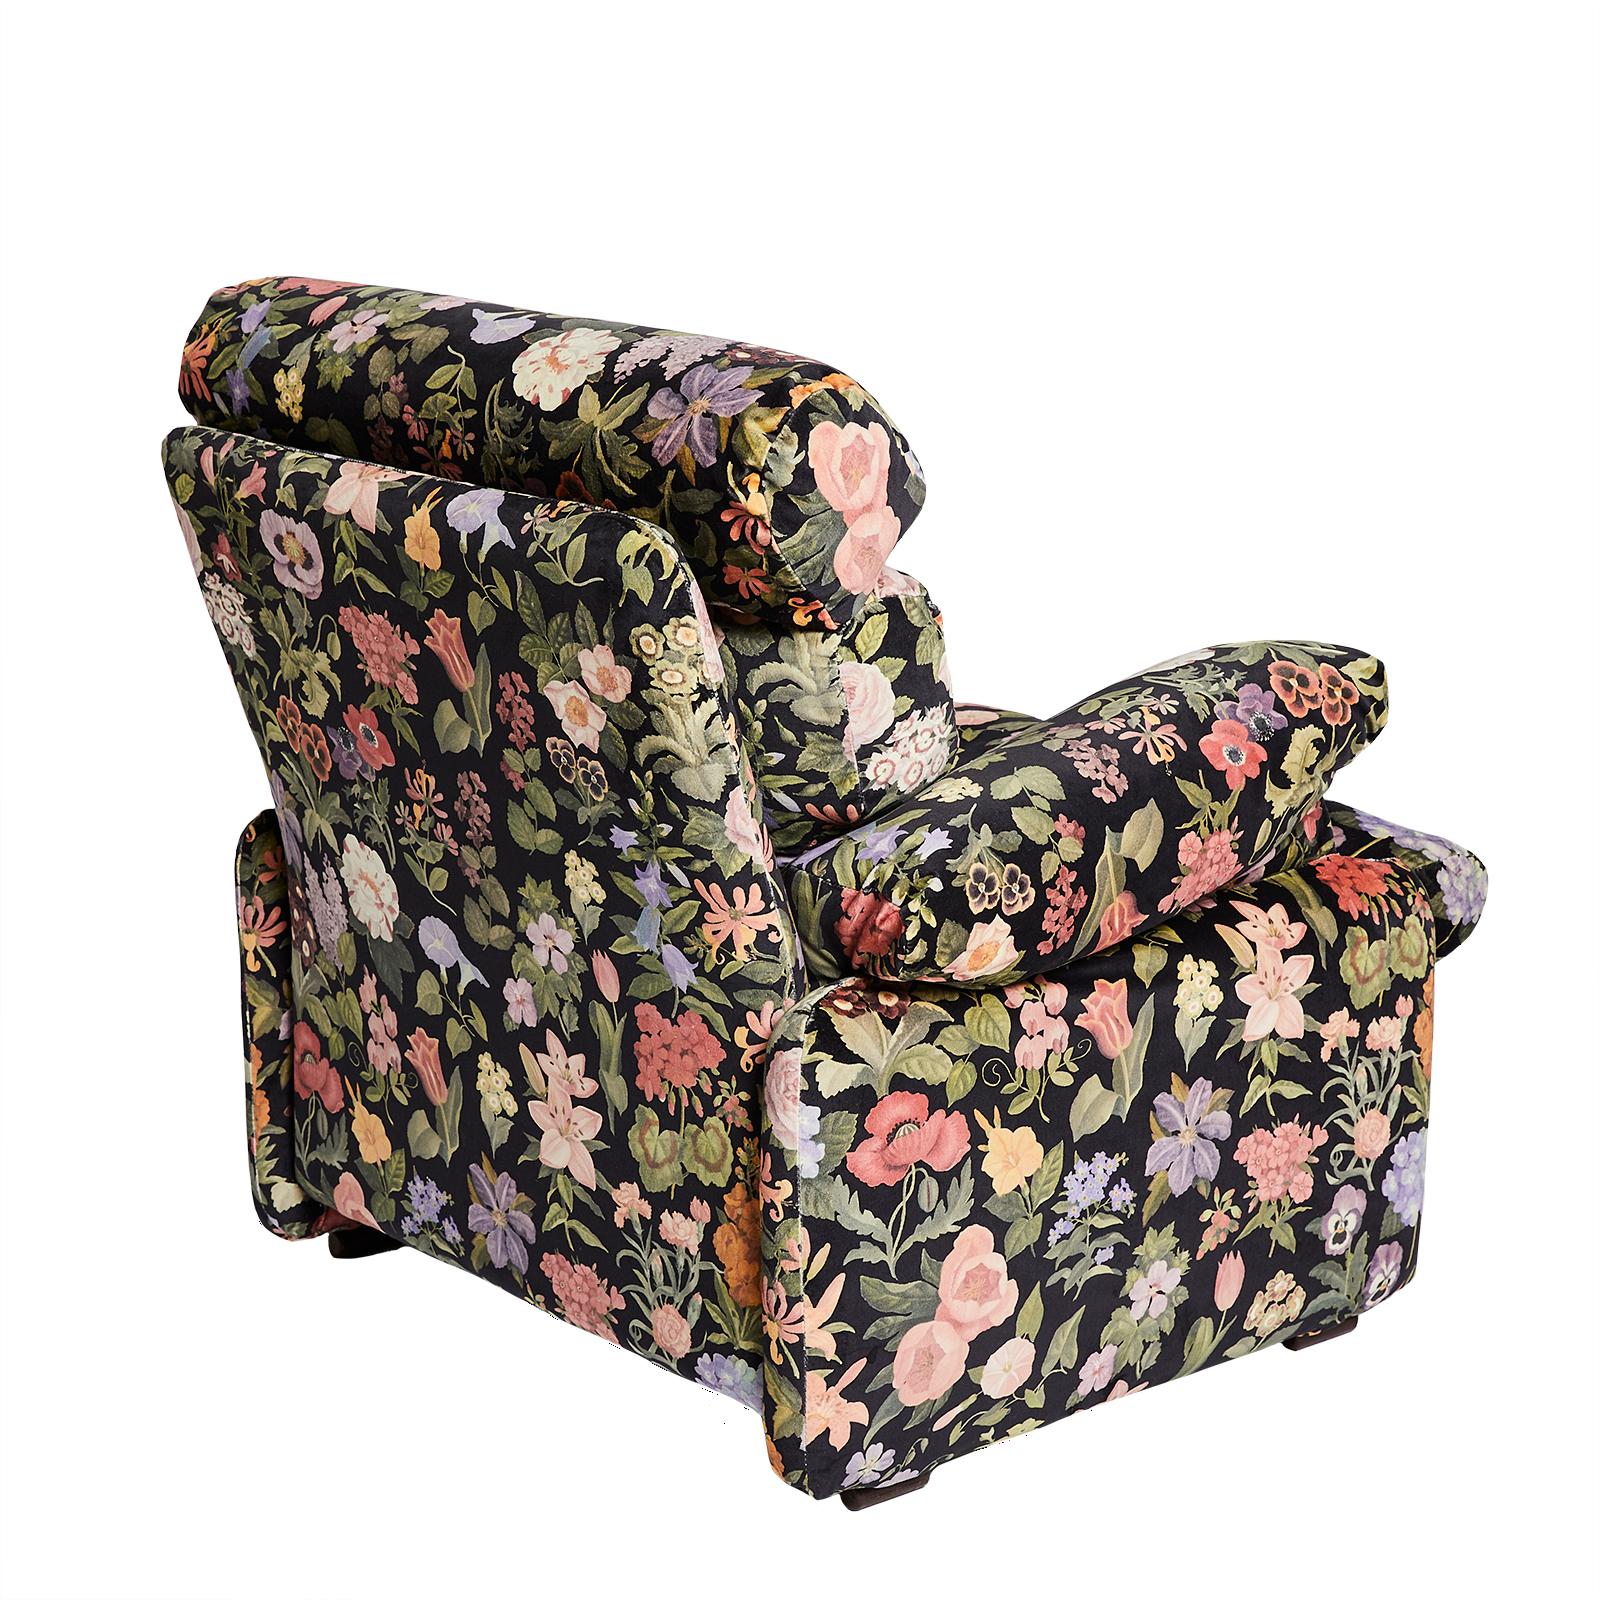 Reupholstered in the dark florals of FLORALIA velvet, this B&B Italia armchair by Tobia Scarpa is the epitome of 1970’s style, with a House of Hackney twist.

Named for the Roman goddess of flowers, FLORALIA celebrates Nature in all her floral glory